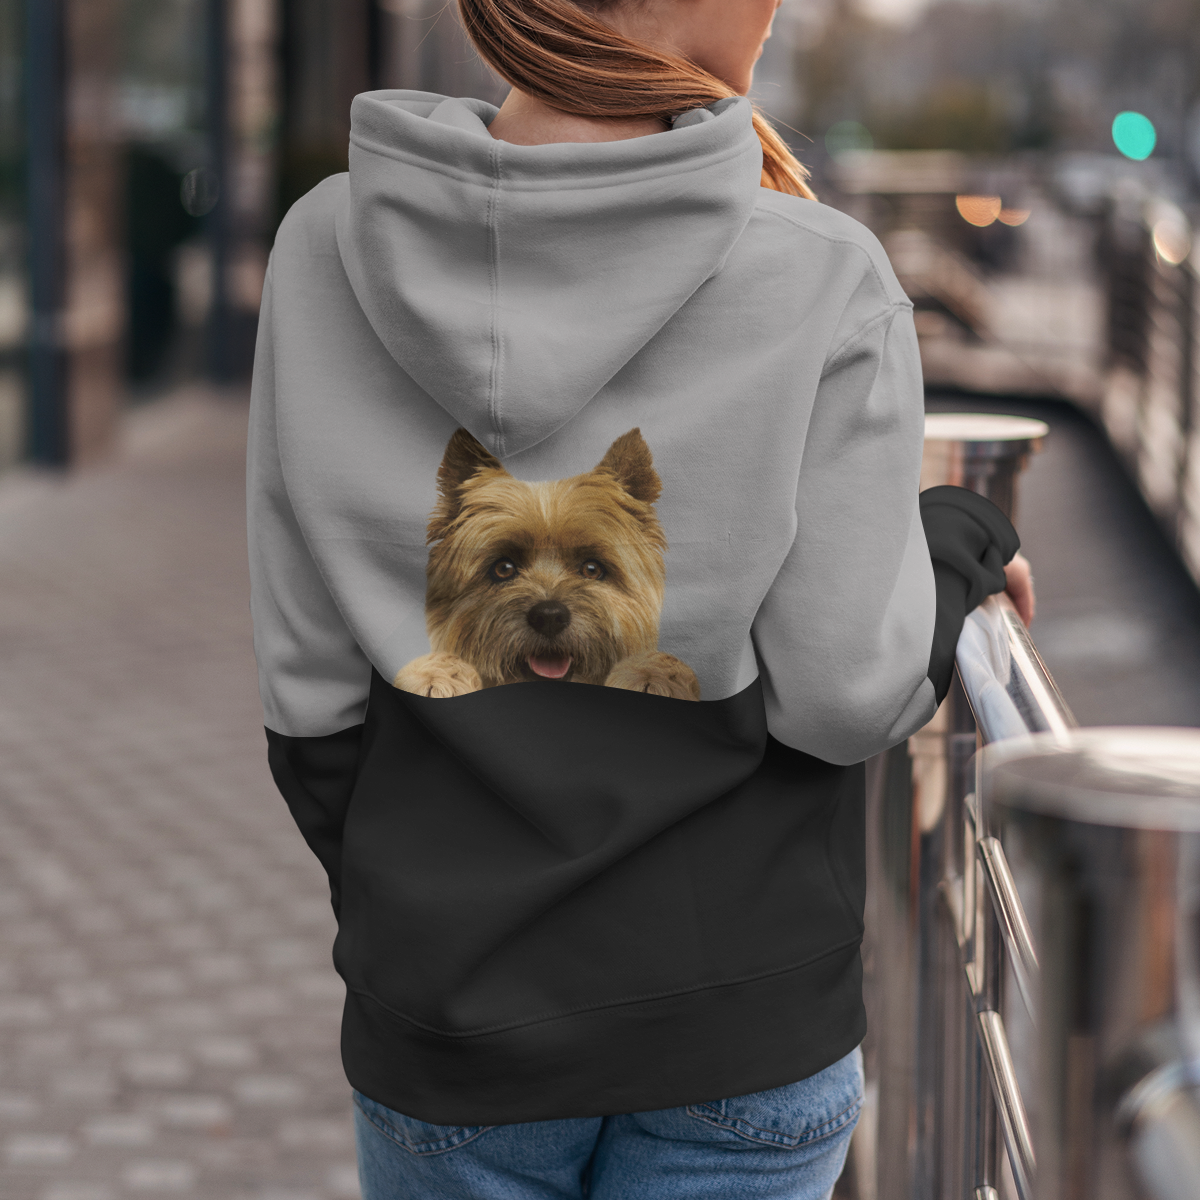 Can You See Me - Cairn Terrier Hoodie V2